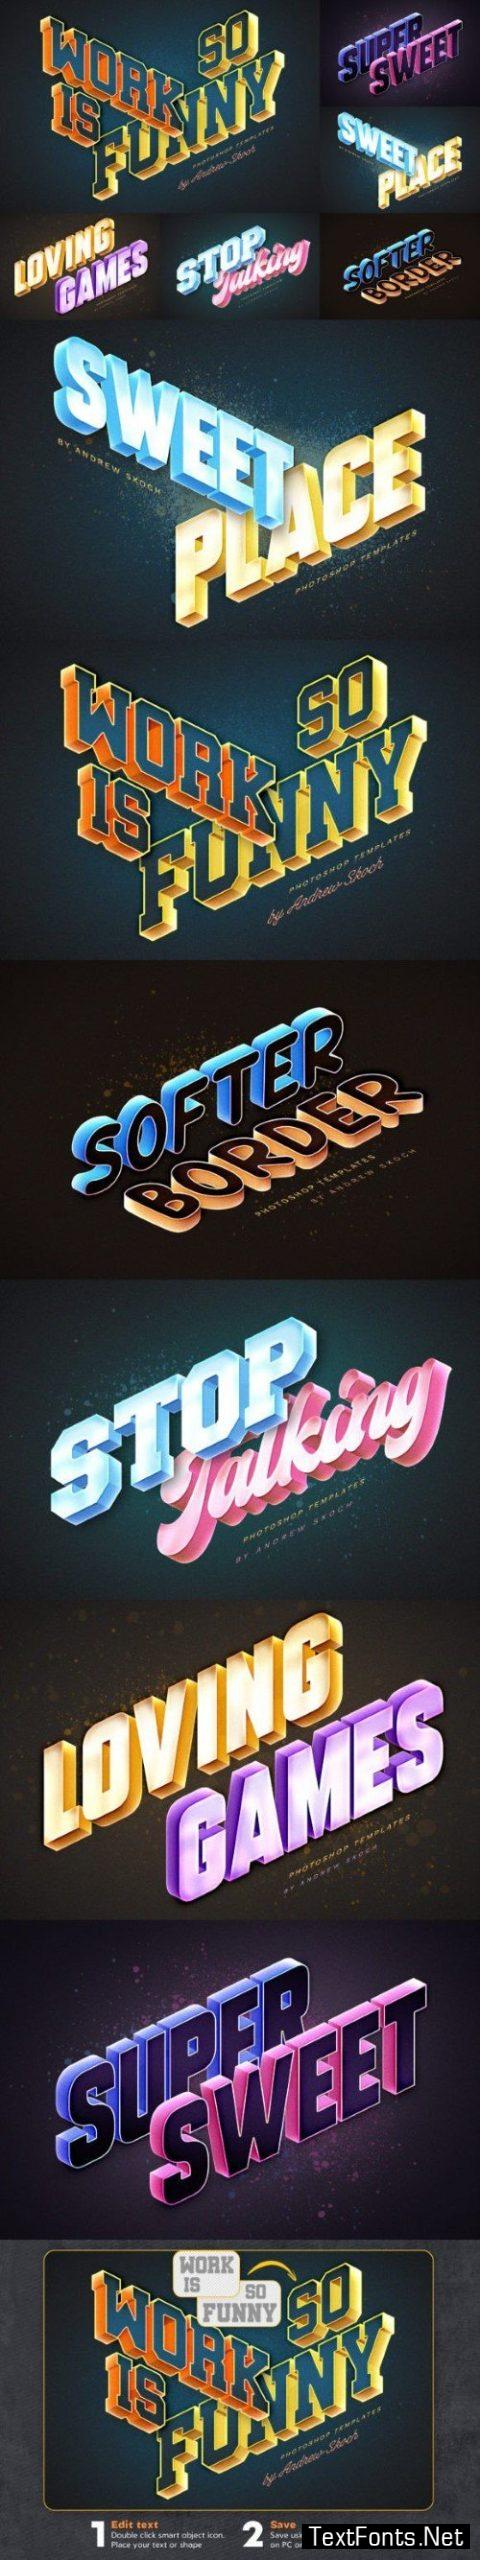 adding styles to text in photoshop